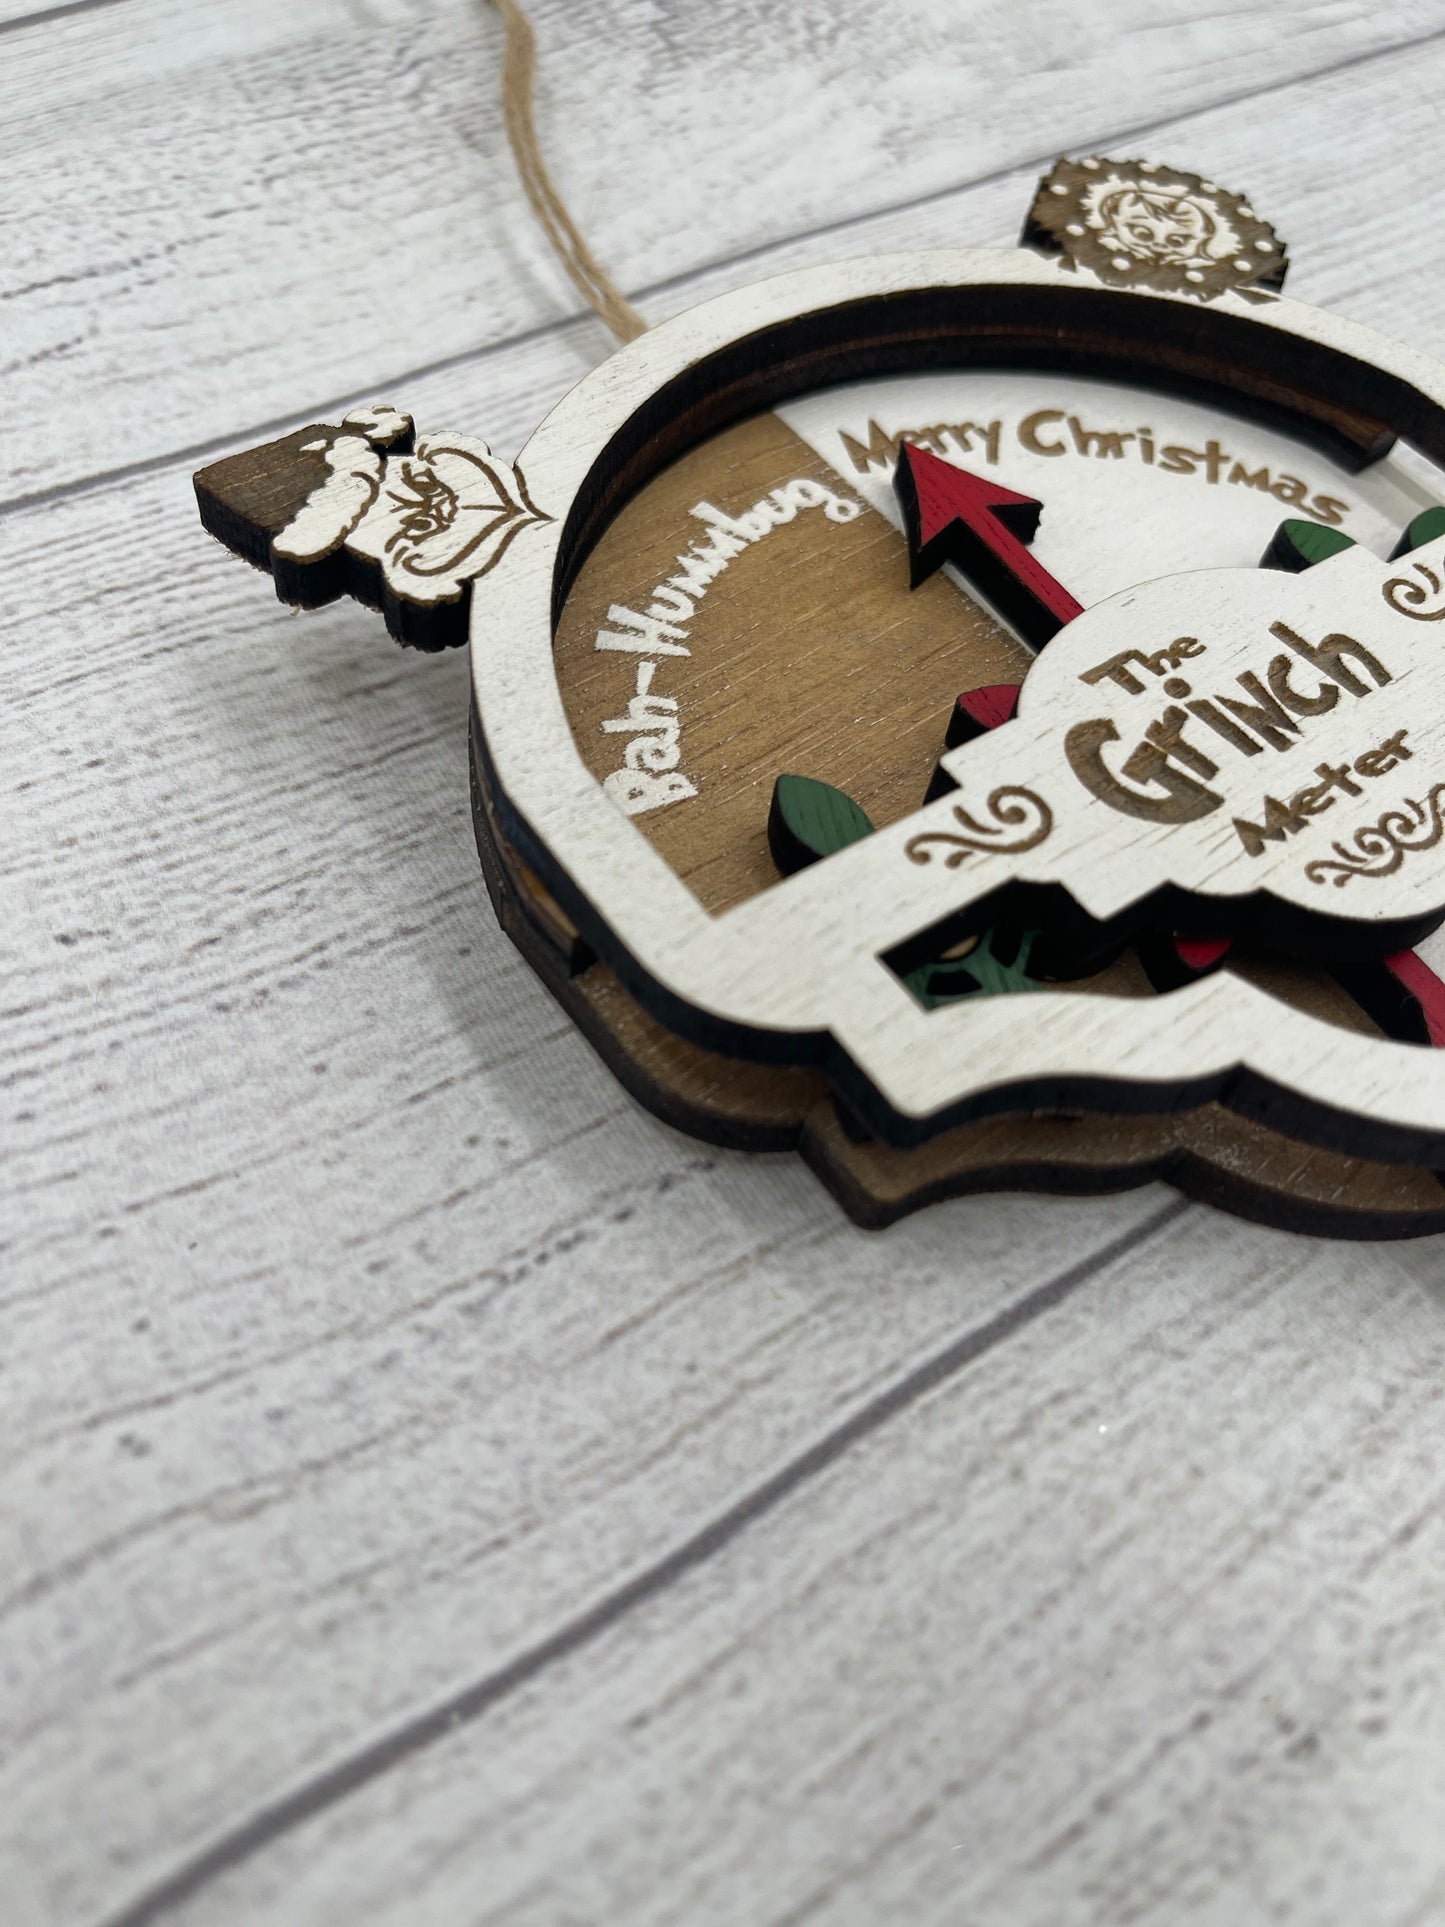 The Grinch Meter - Moveable Christmas Ornament with Cindy Lou Who